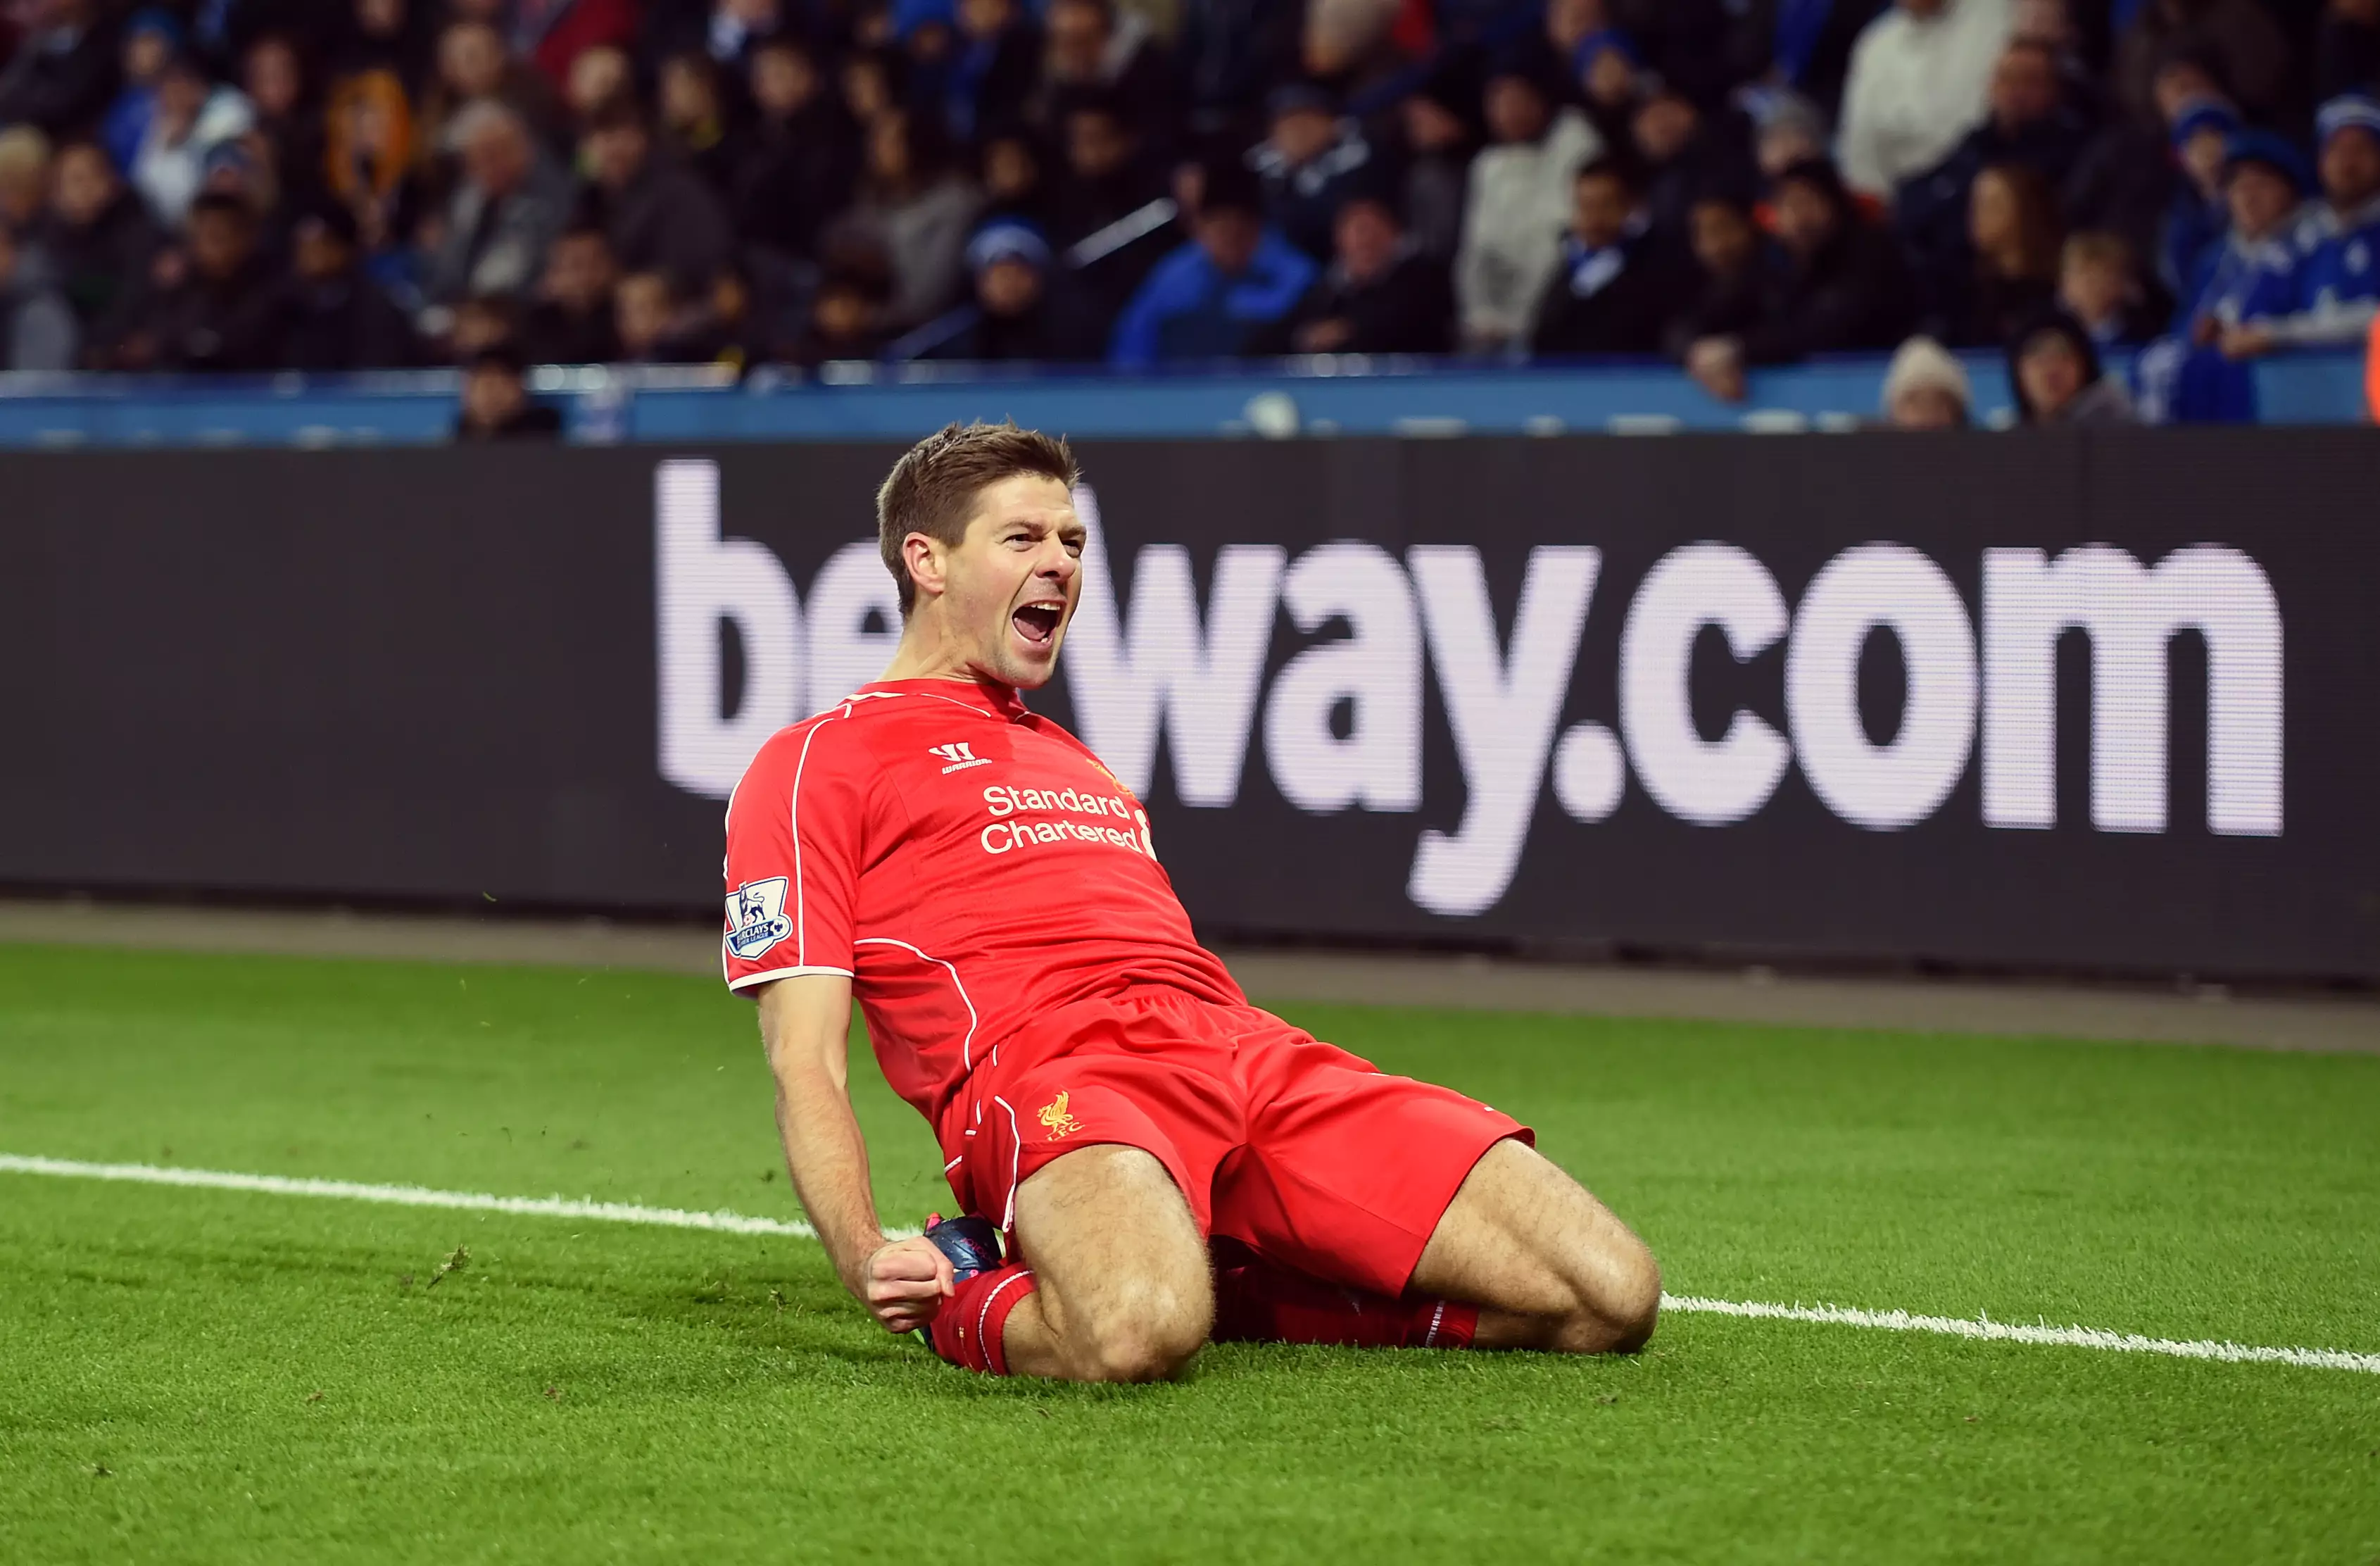 There was of course a place in the side for Steven Gerrard